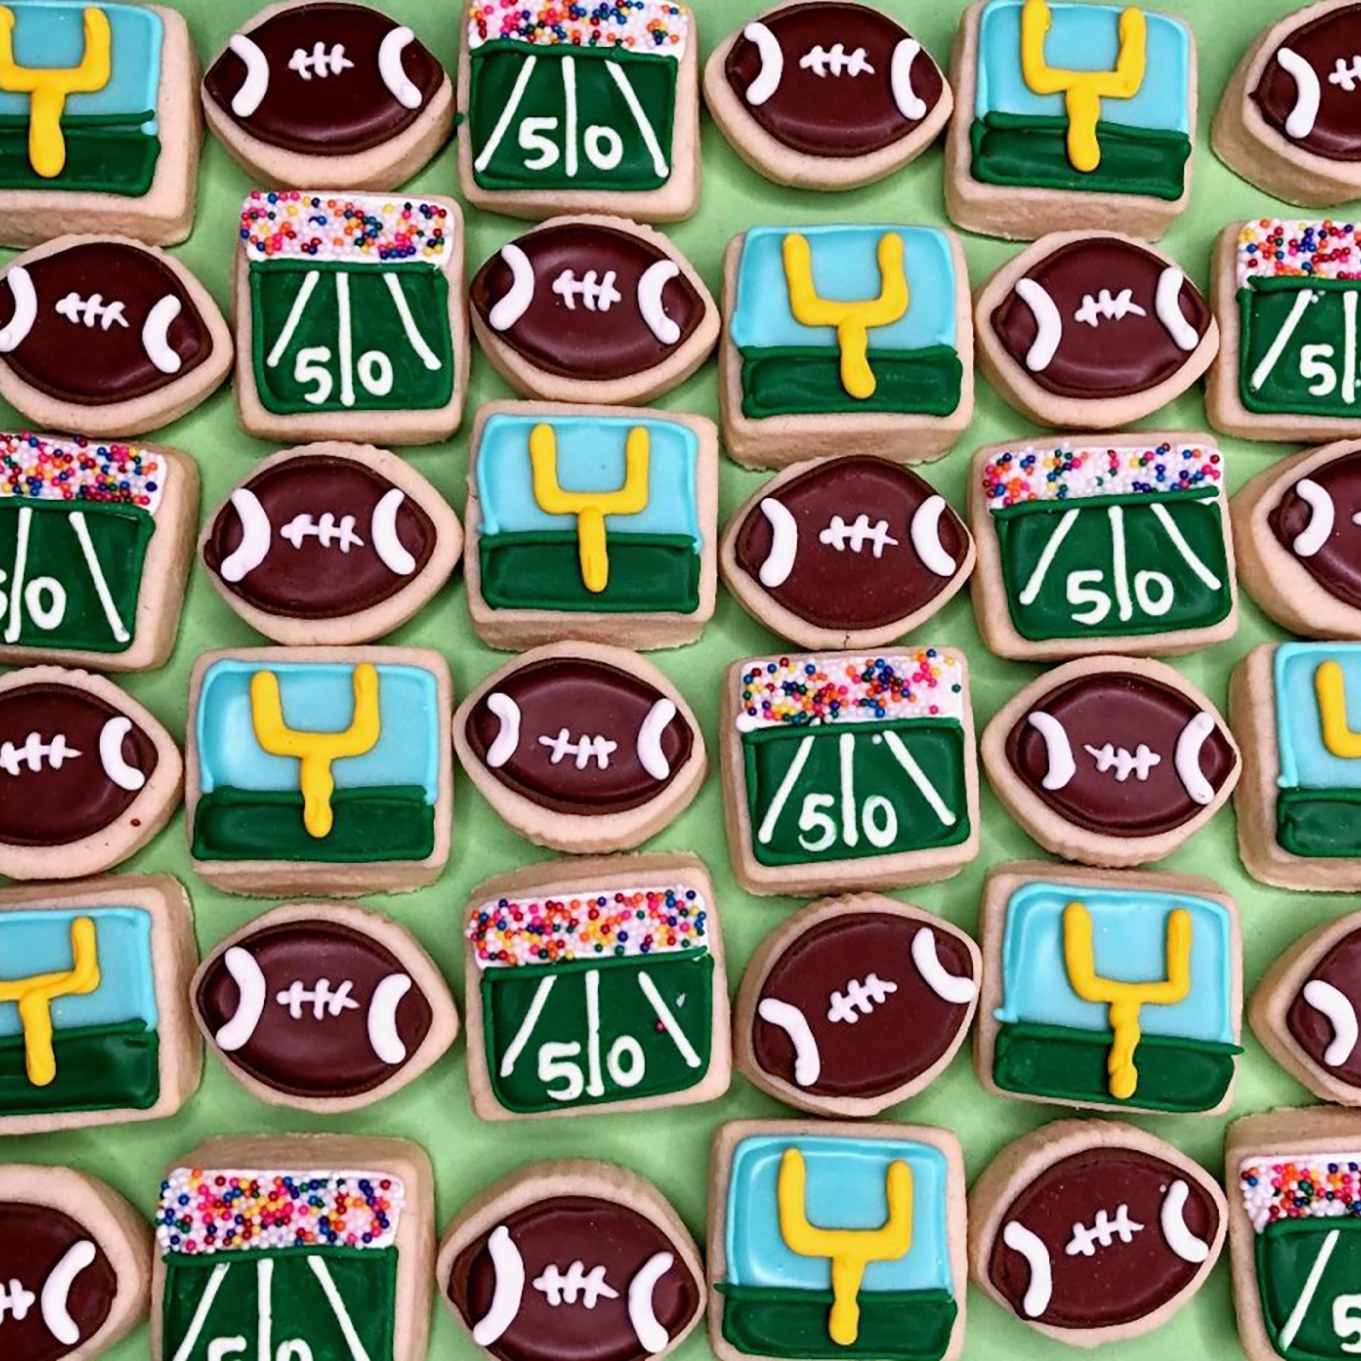 Football-decorated cookies